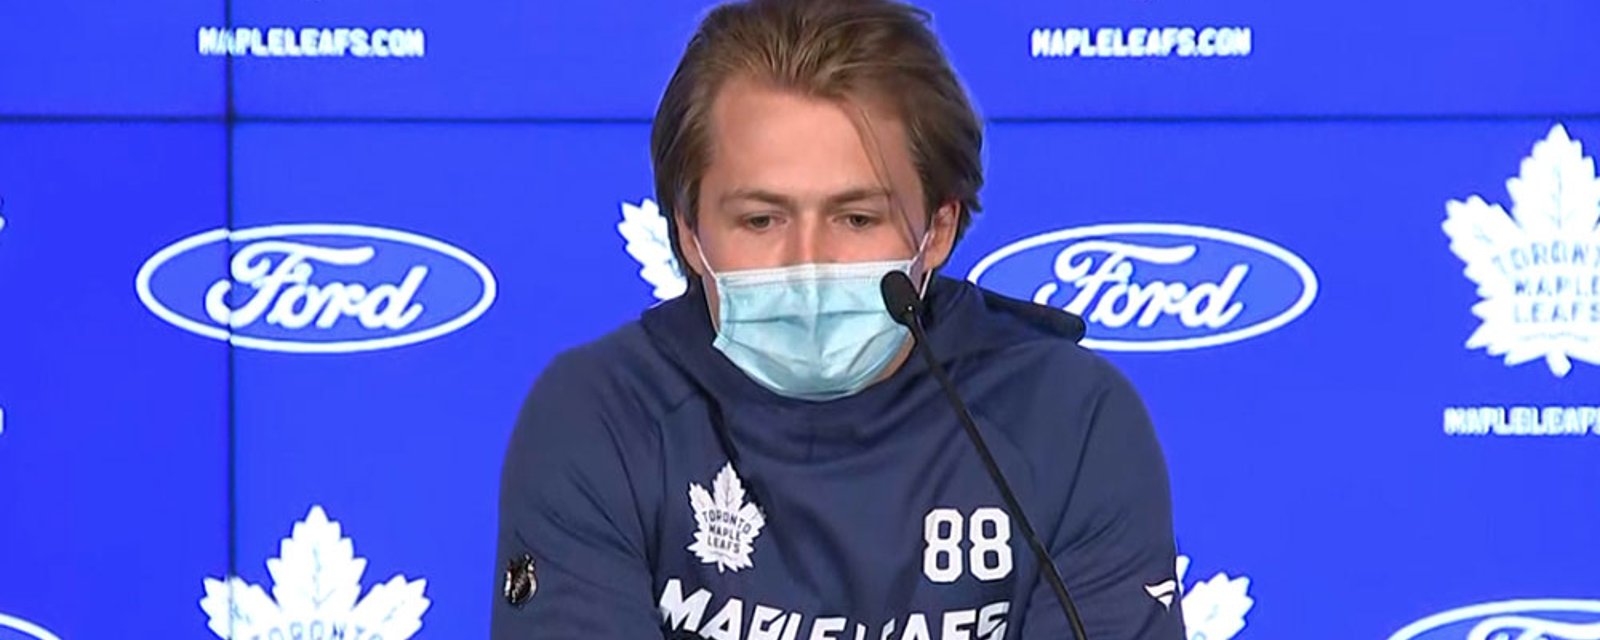 William Nylander admits that he's unvaccinated, despite reports that 100% of Leafs players are/were vaccinated